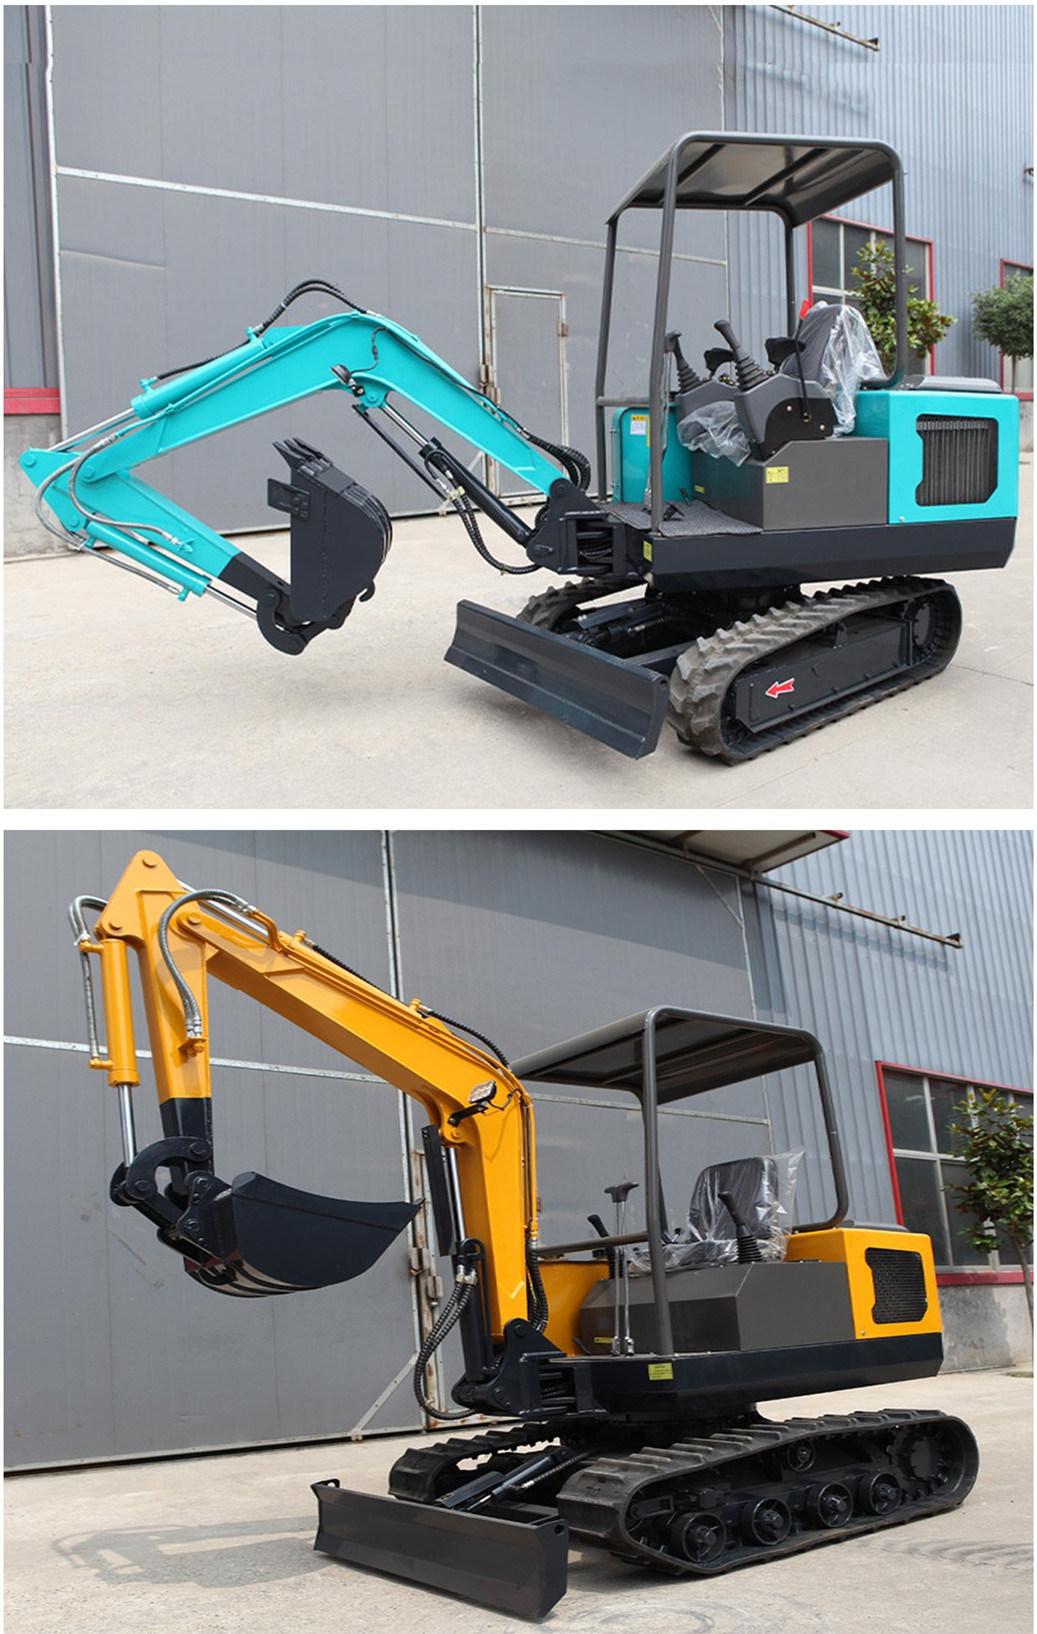 Diesel Engine Micro Digger Mini Excavator with Hammer Auger